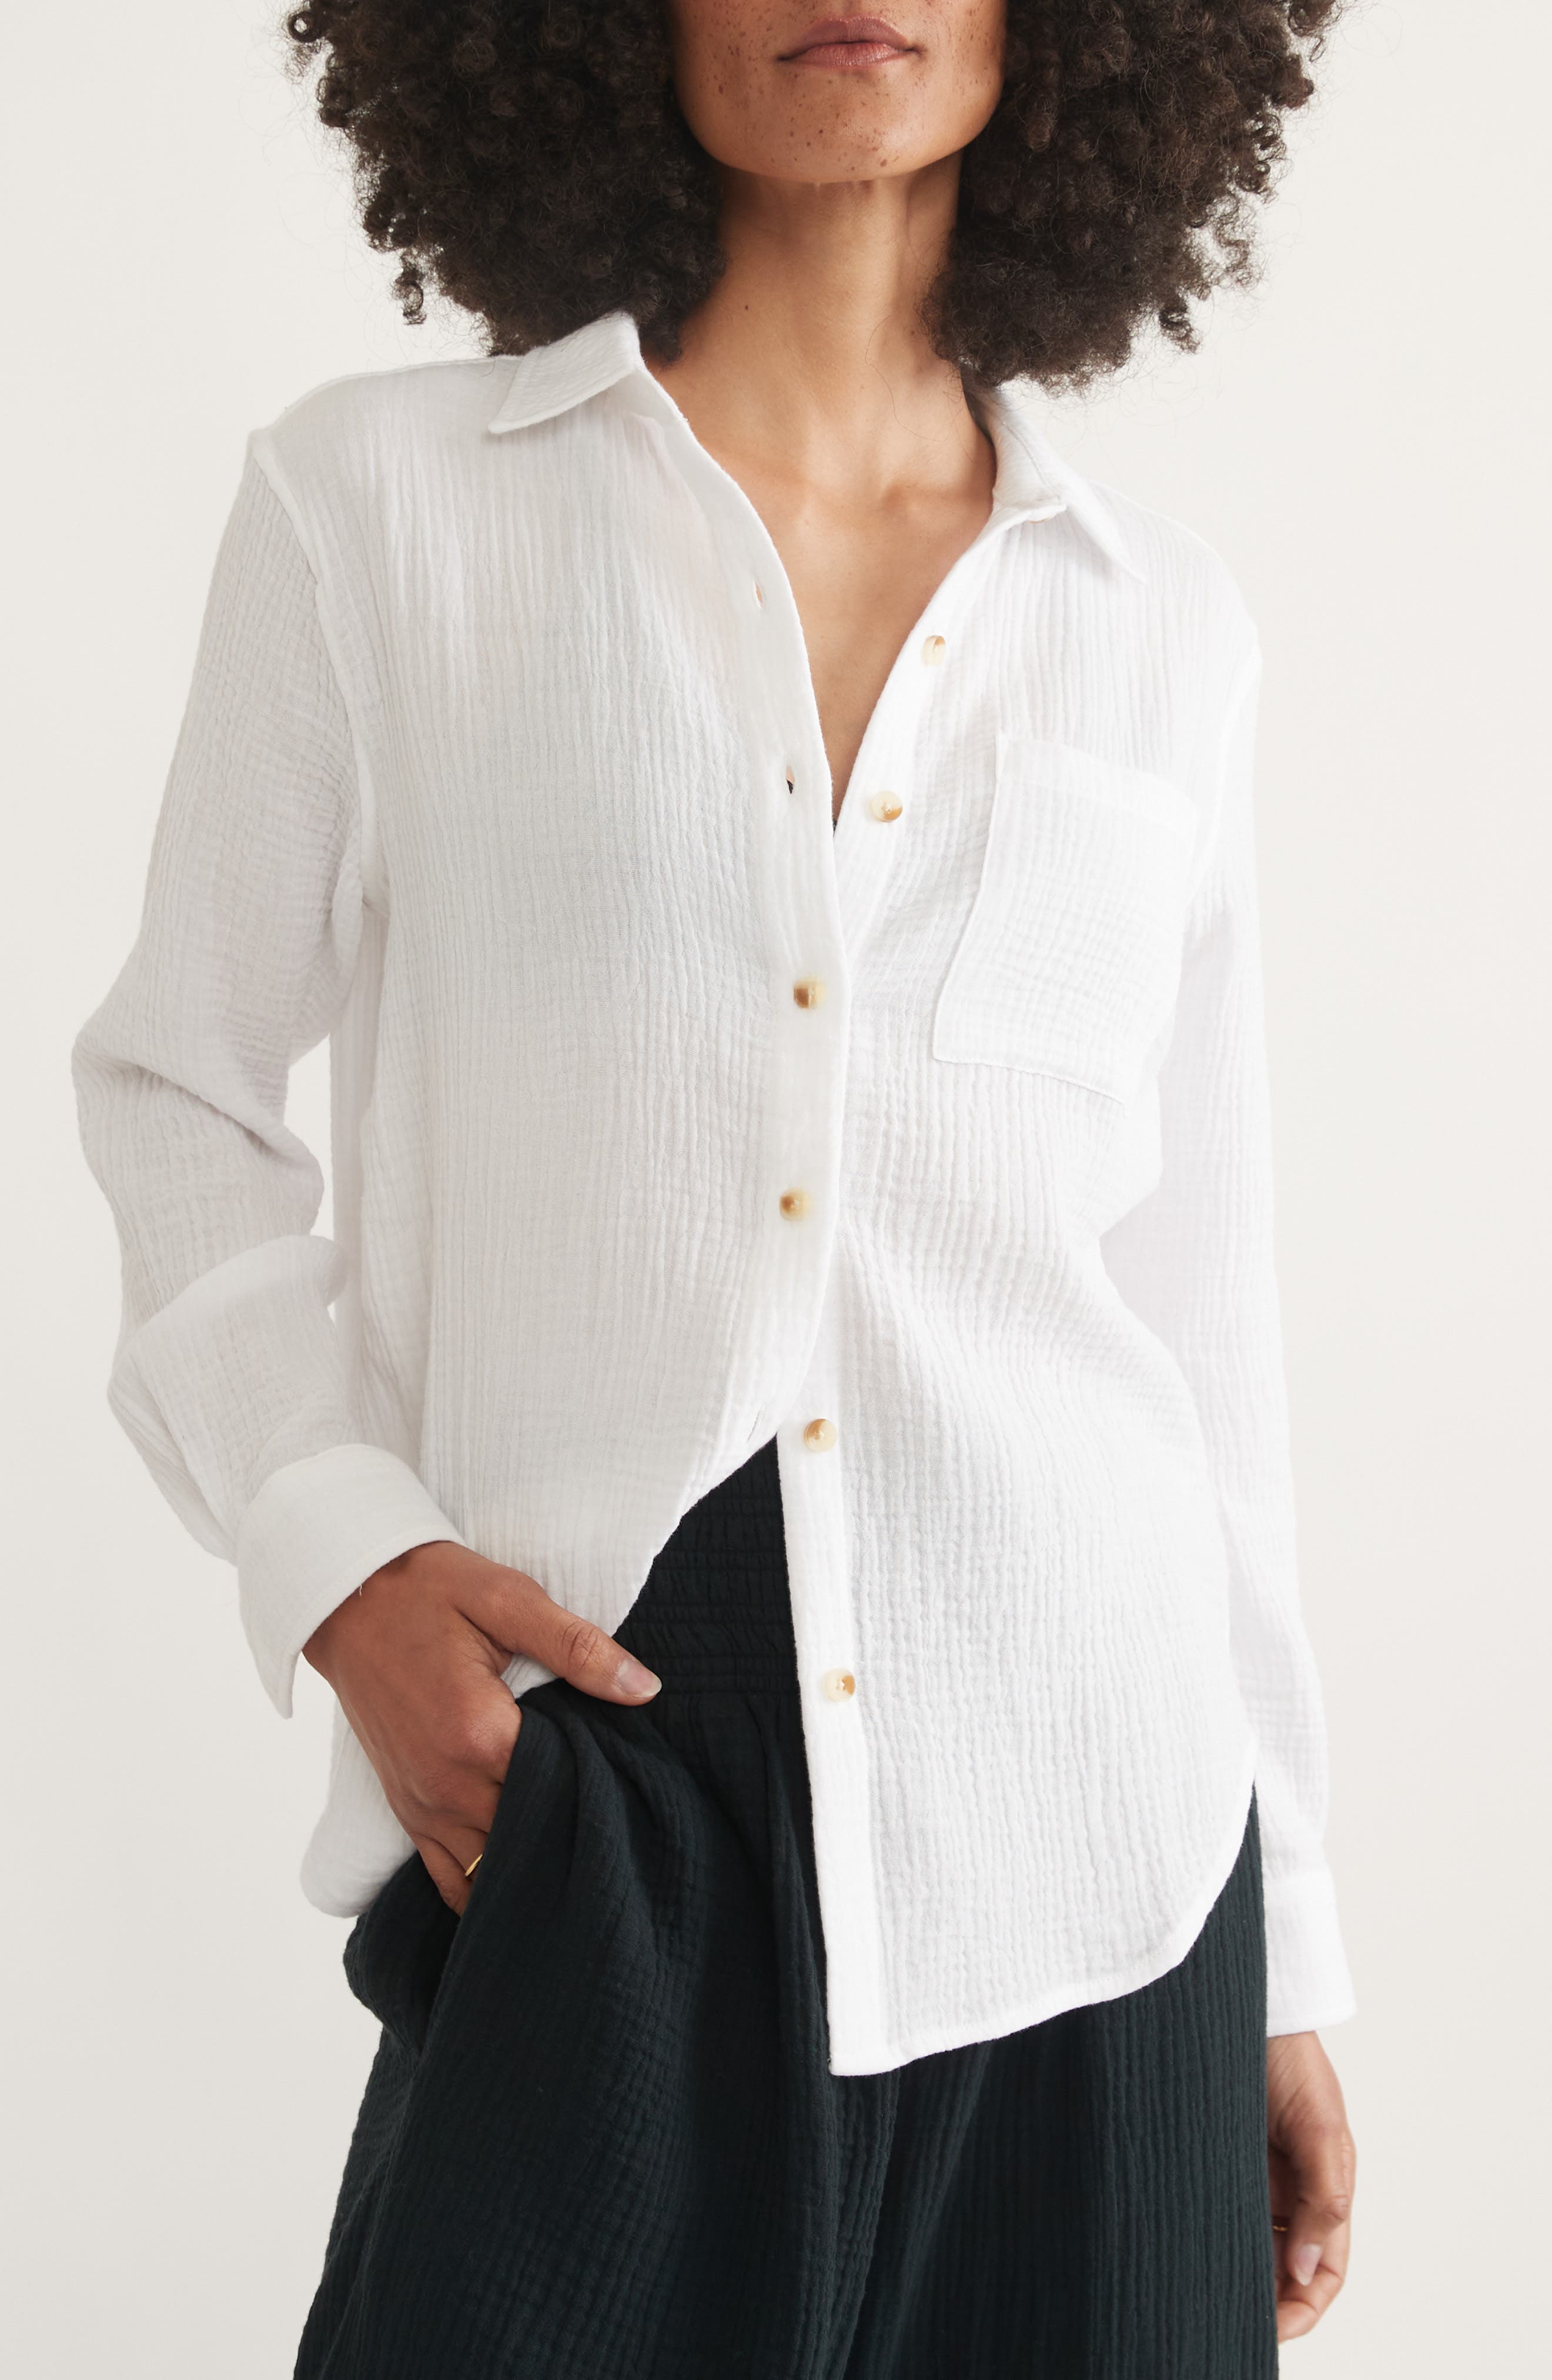 Marine Layer Double Gauze Cotton Button-Up Shirt | Nordstrom